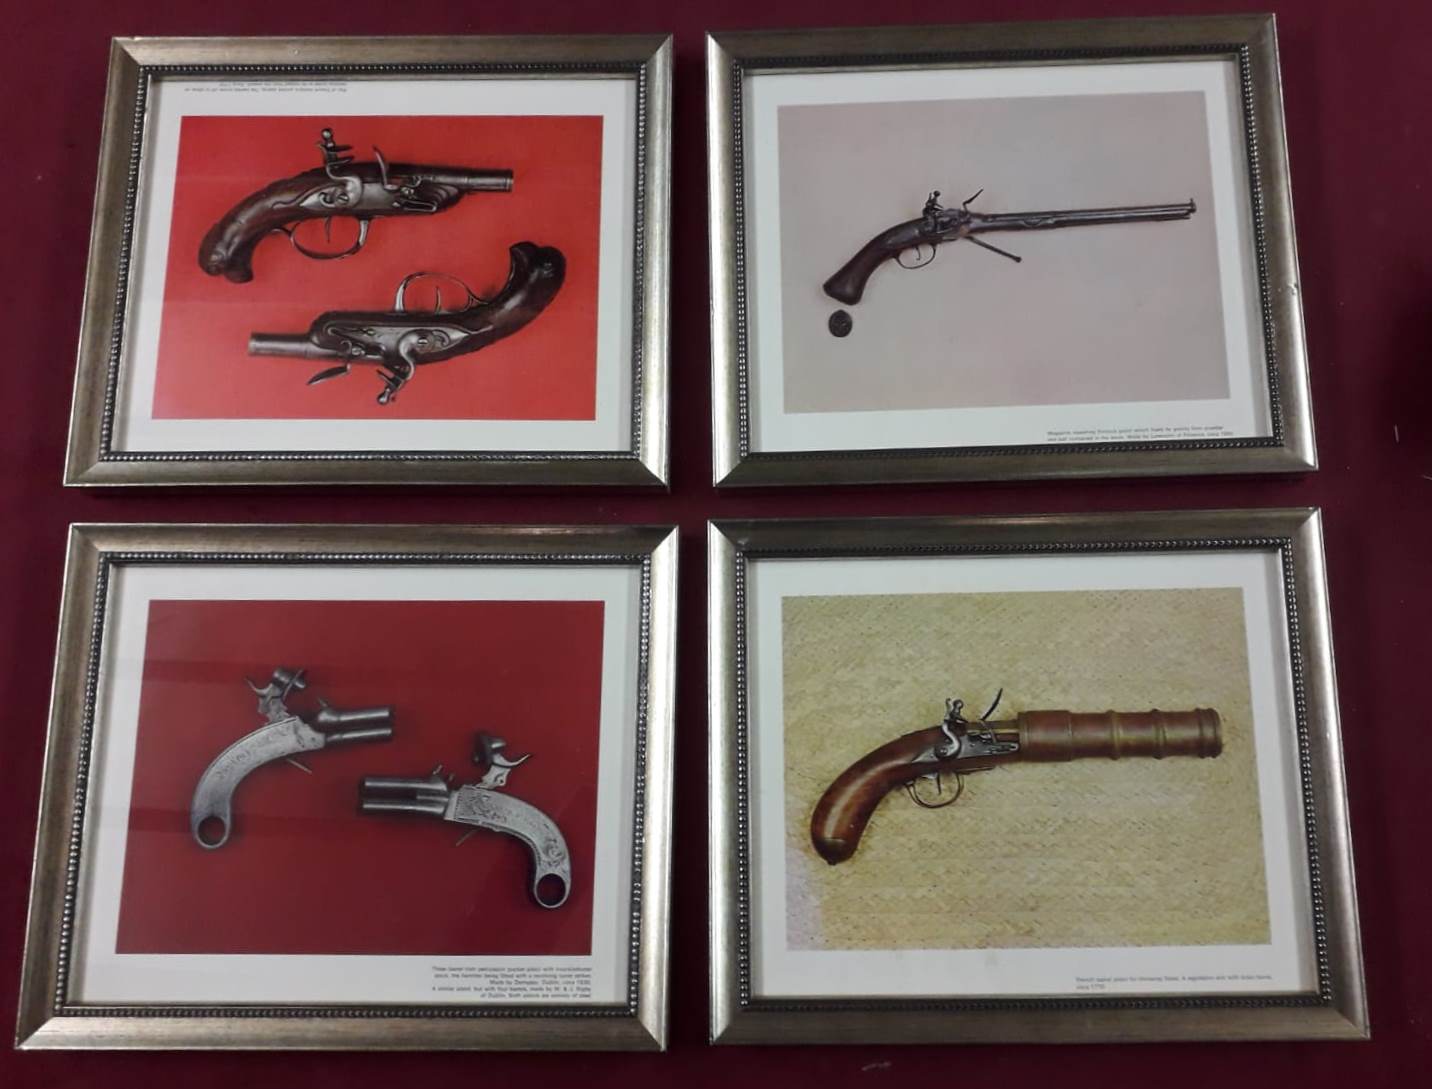 An attractive set of 4 coloured Prints, Antique Fire-Arms.